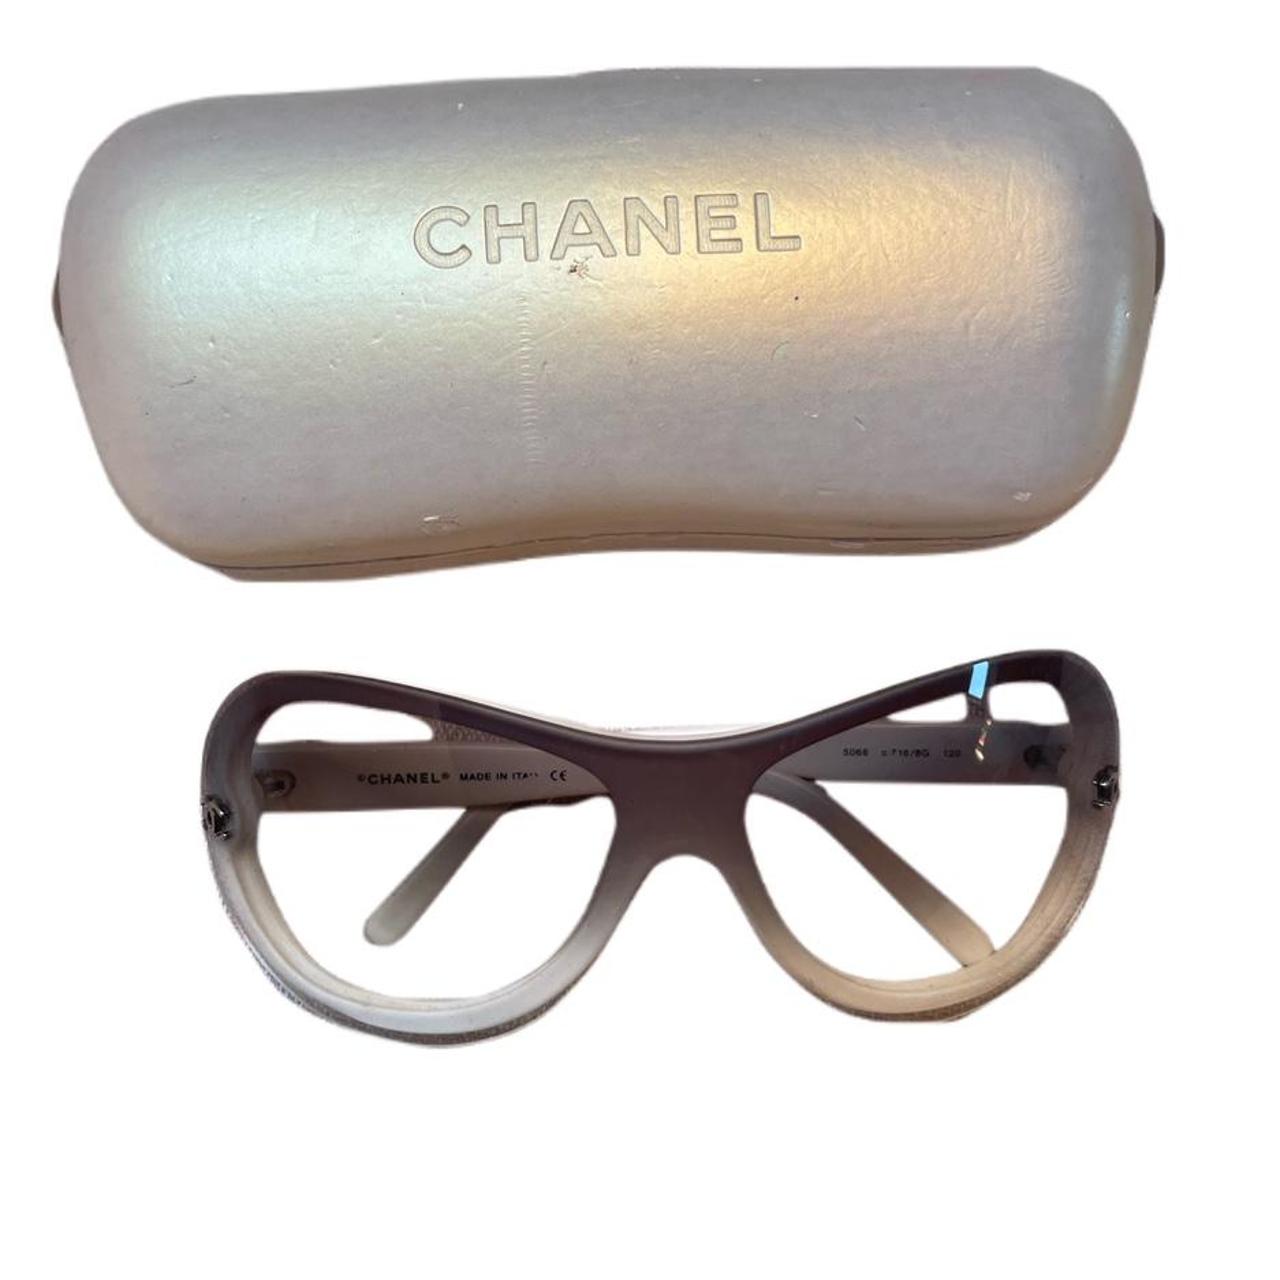 CHANEL CC Logo Sunglasses 5066 in white and grey